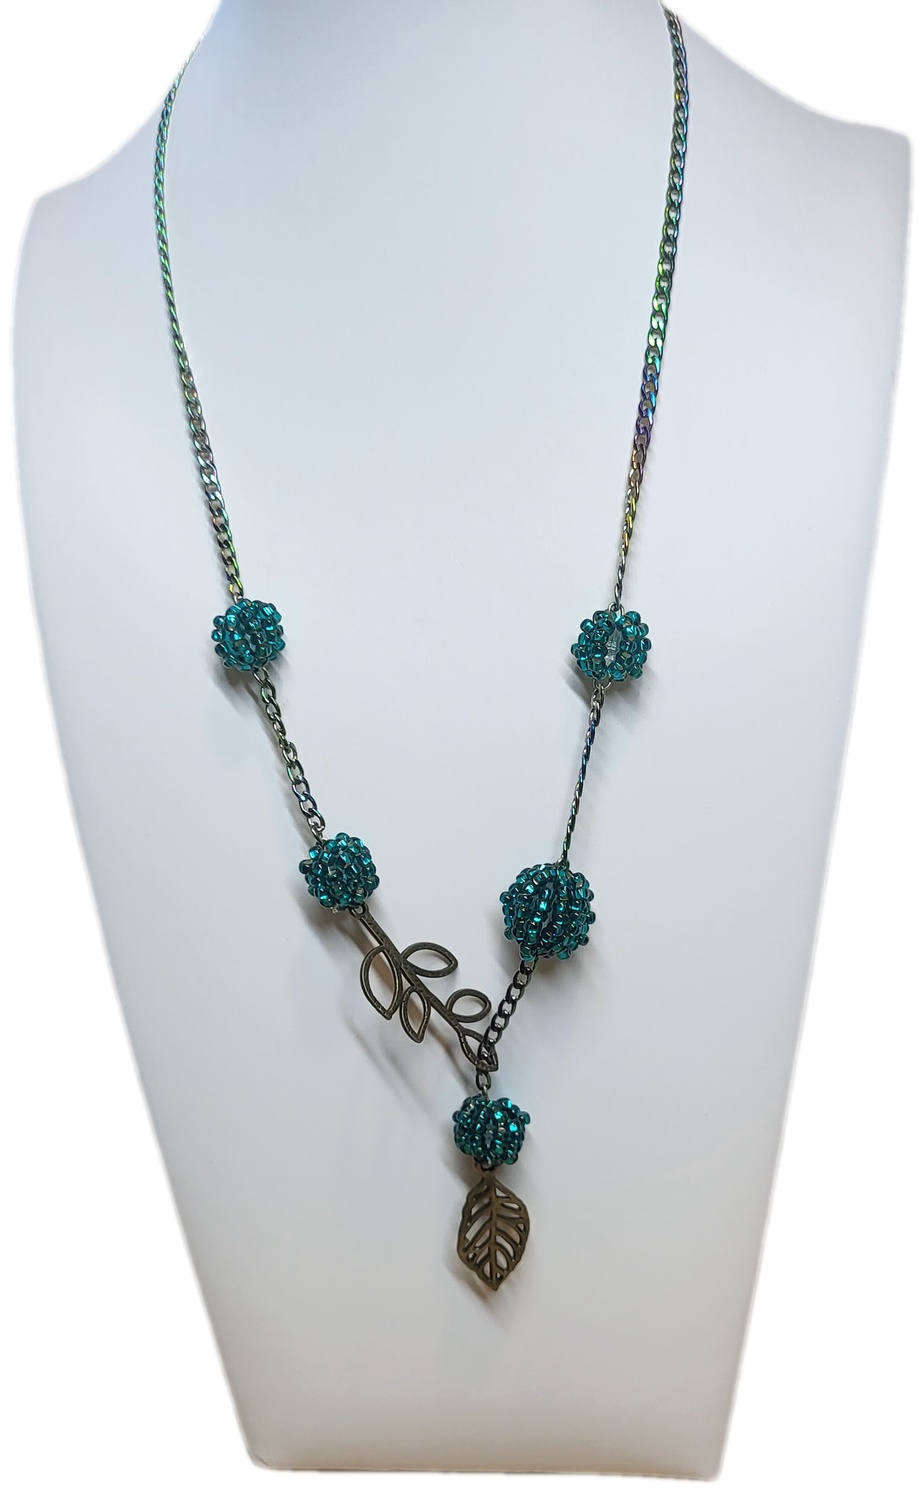 Rainbow Necklace with handmade Teal Color Glass Beads &amp; Leaves